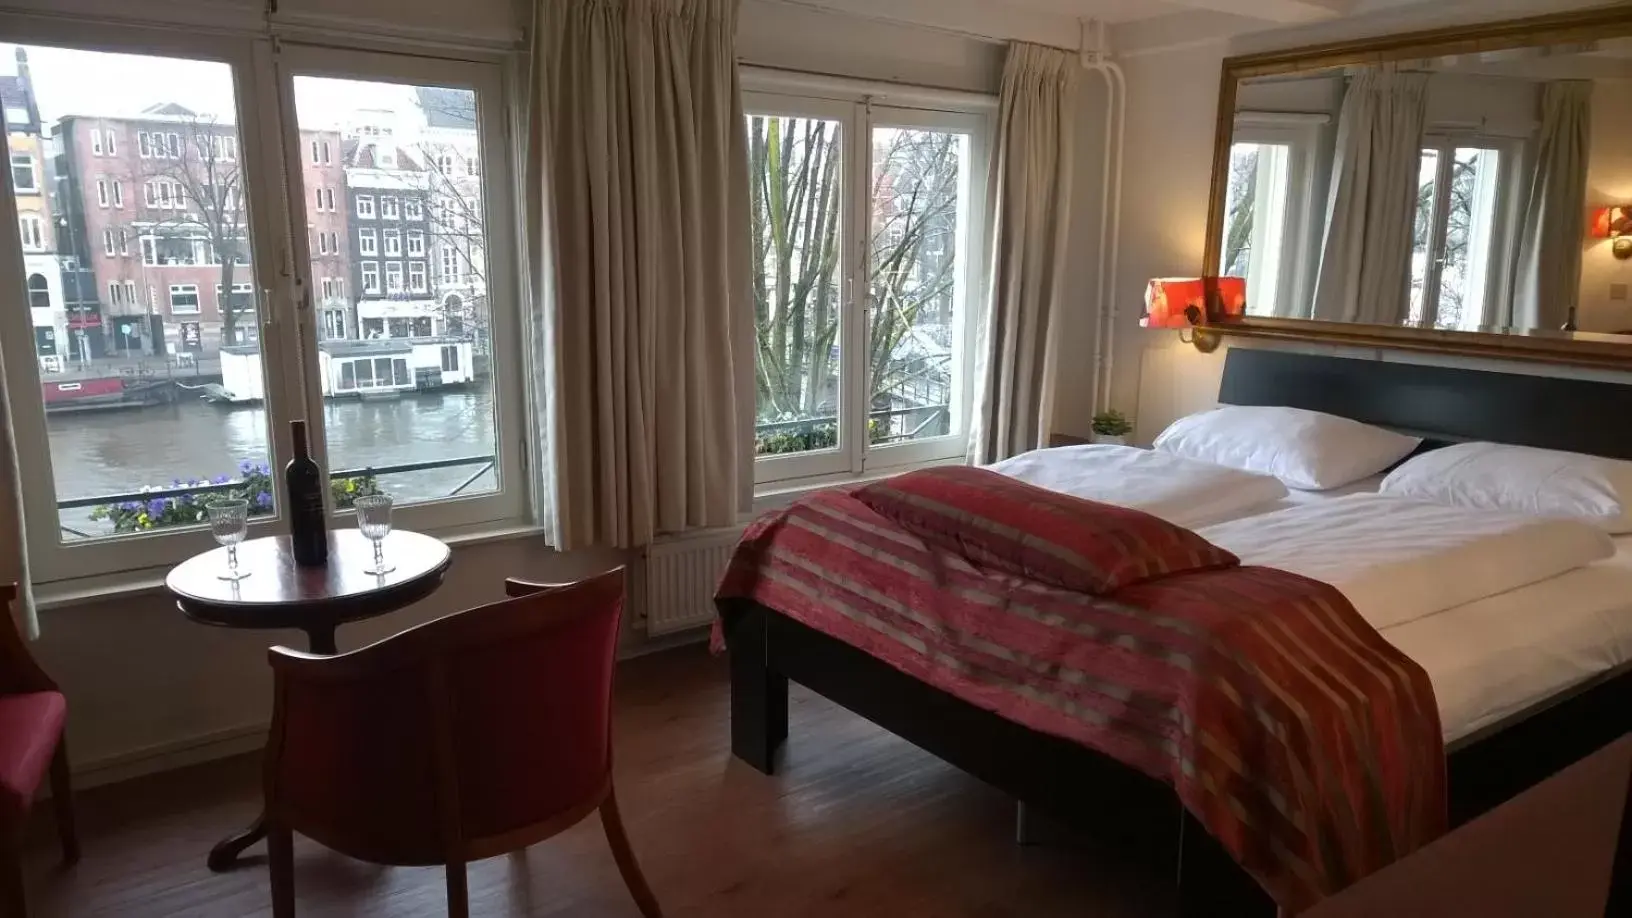 Bed in Amsterdam House Hotel